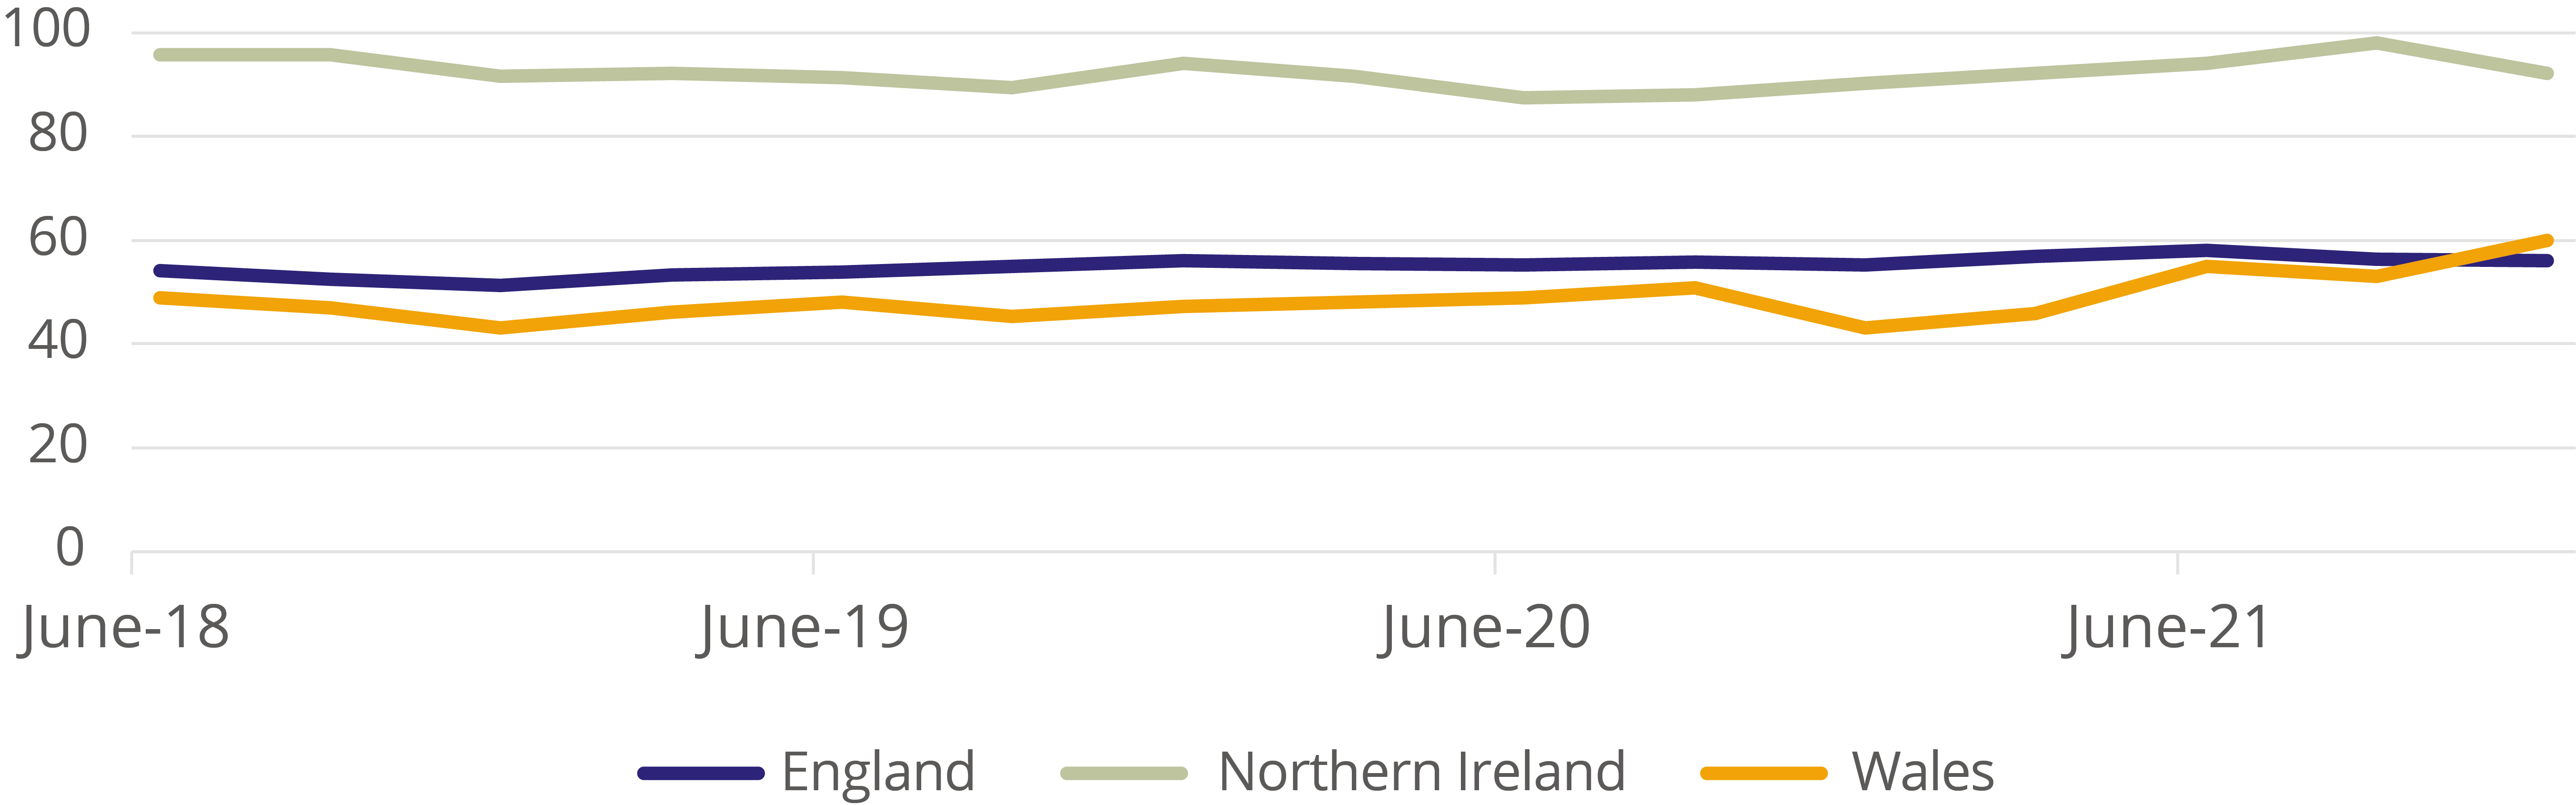 Percentage of meat businesses rated good – Since June 2018, the number of businesses rated good has stayed steady. Northern Ireland has the most at near to 100. England and Wales are similar at around 50 businesses, Wales had a slight decrease in June 2020 but has now increased again.